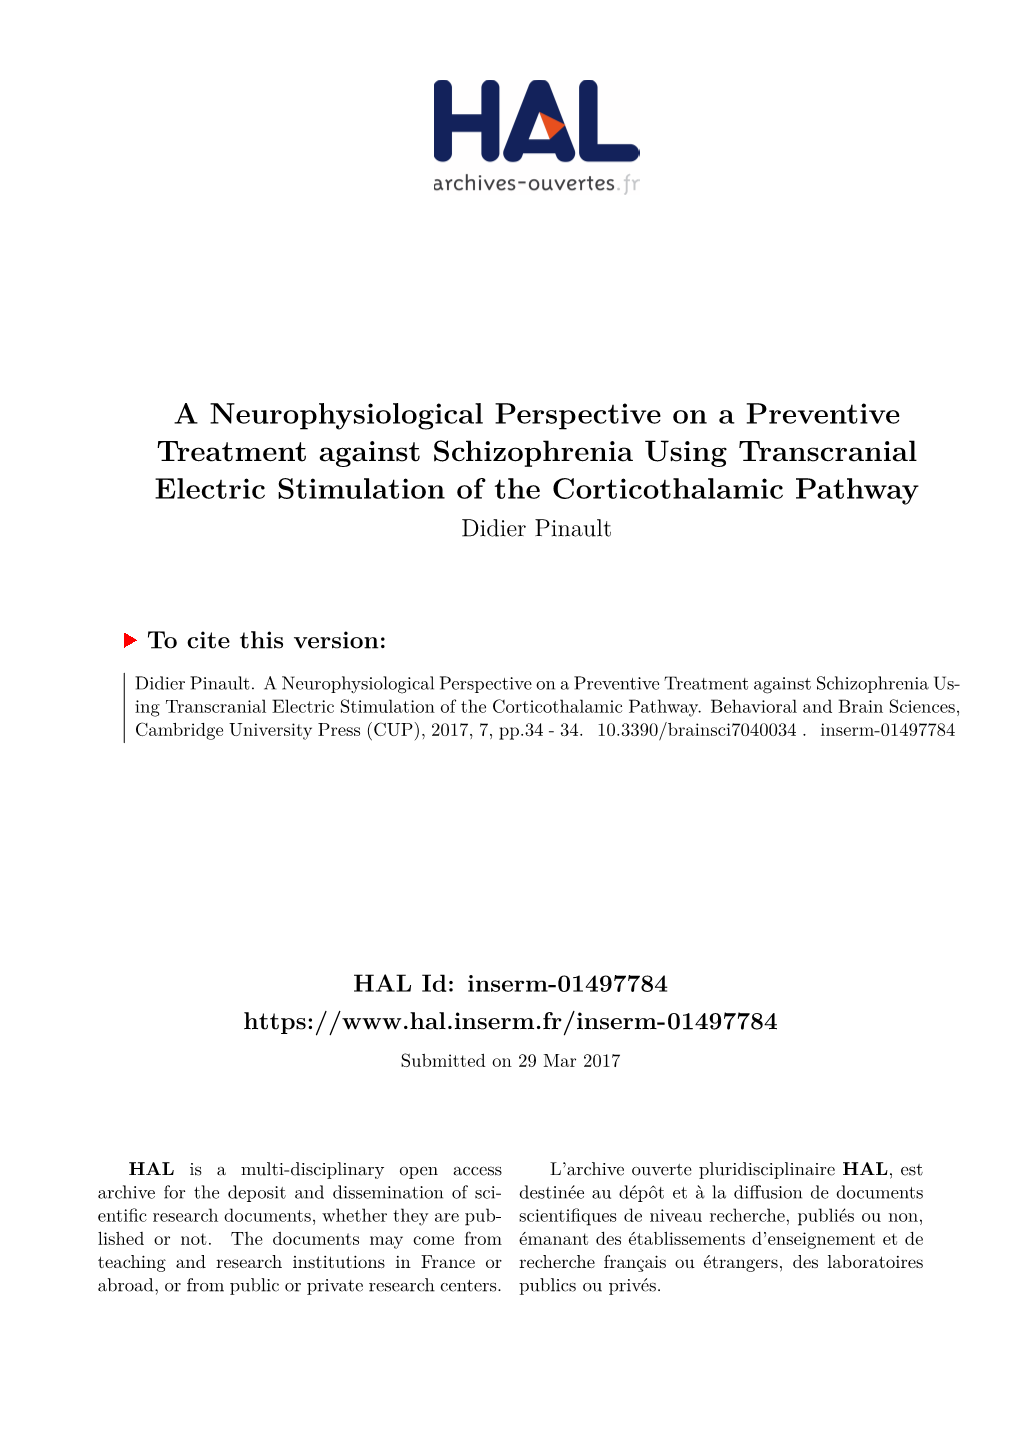 A Neurophysiological Perspective on a Preventive Treatment Against Schizophrenia Using Transcranial Electric Stimulation of the Corticothalamic Pathway Didier Pinault